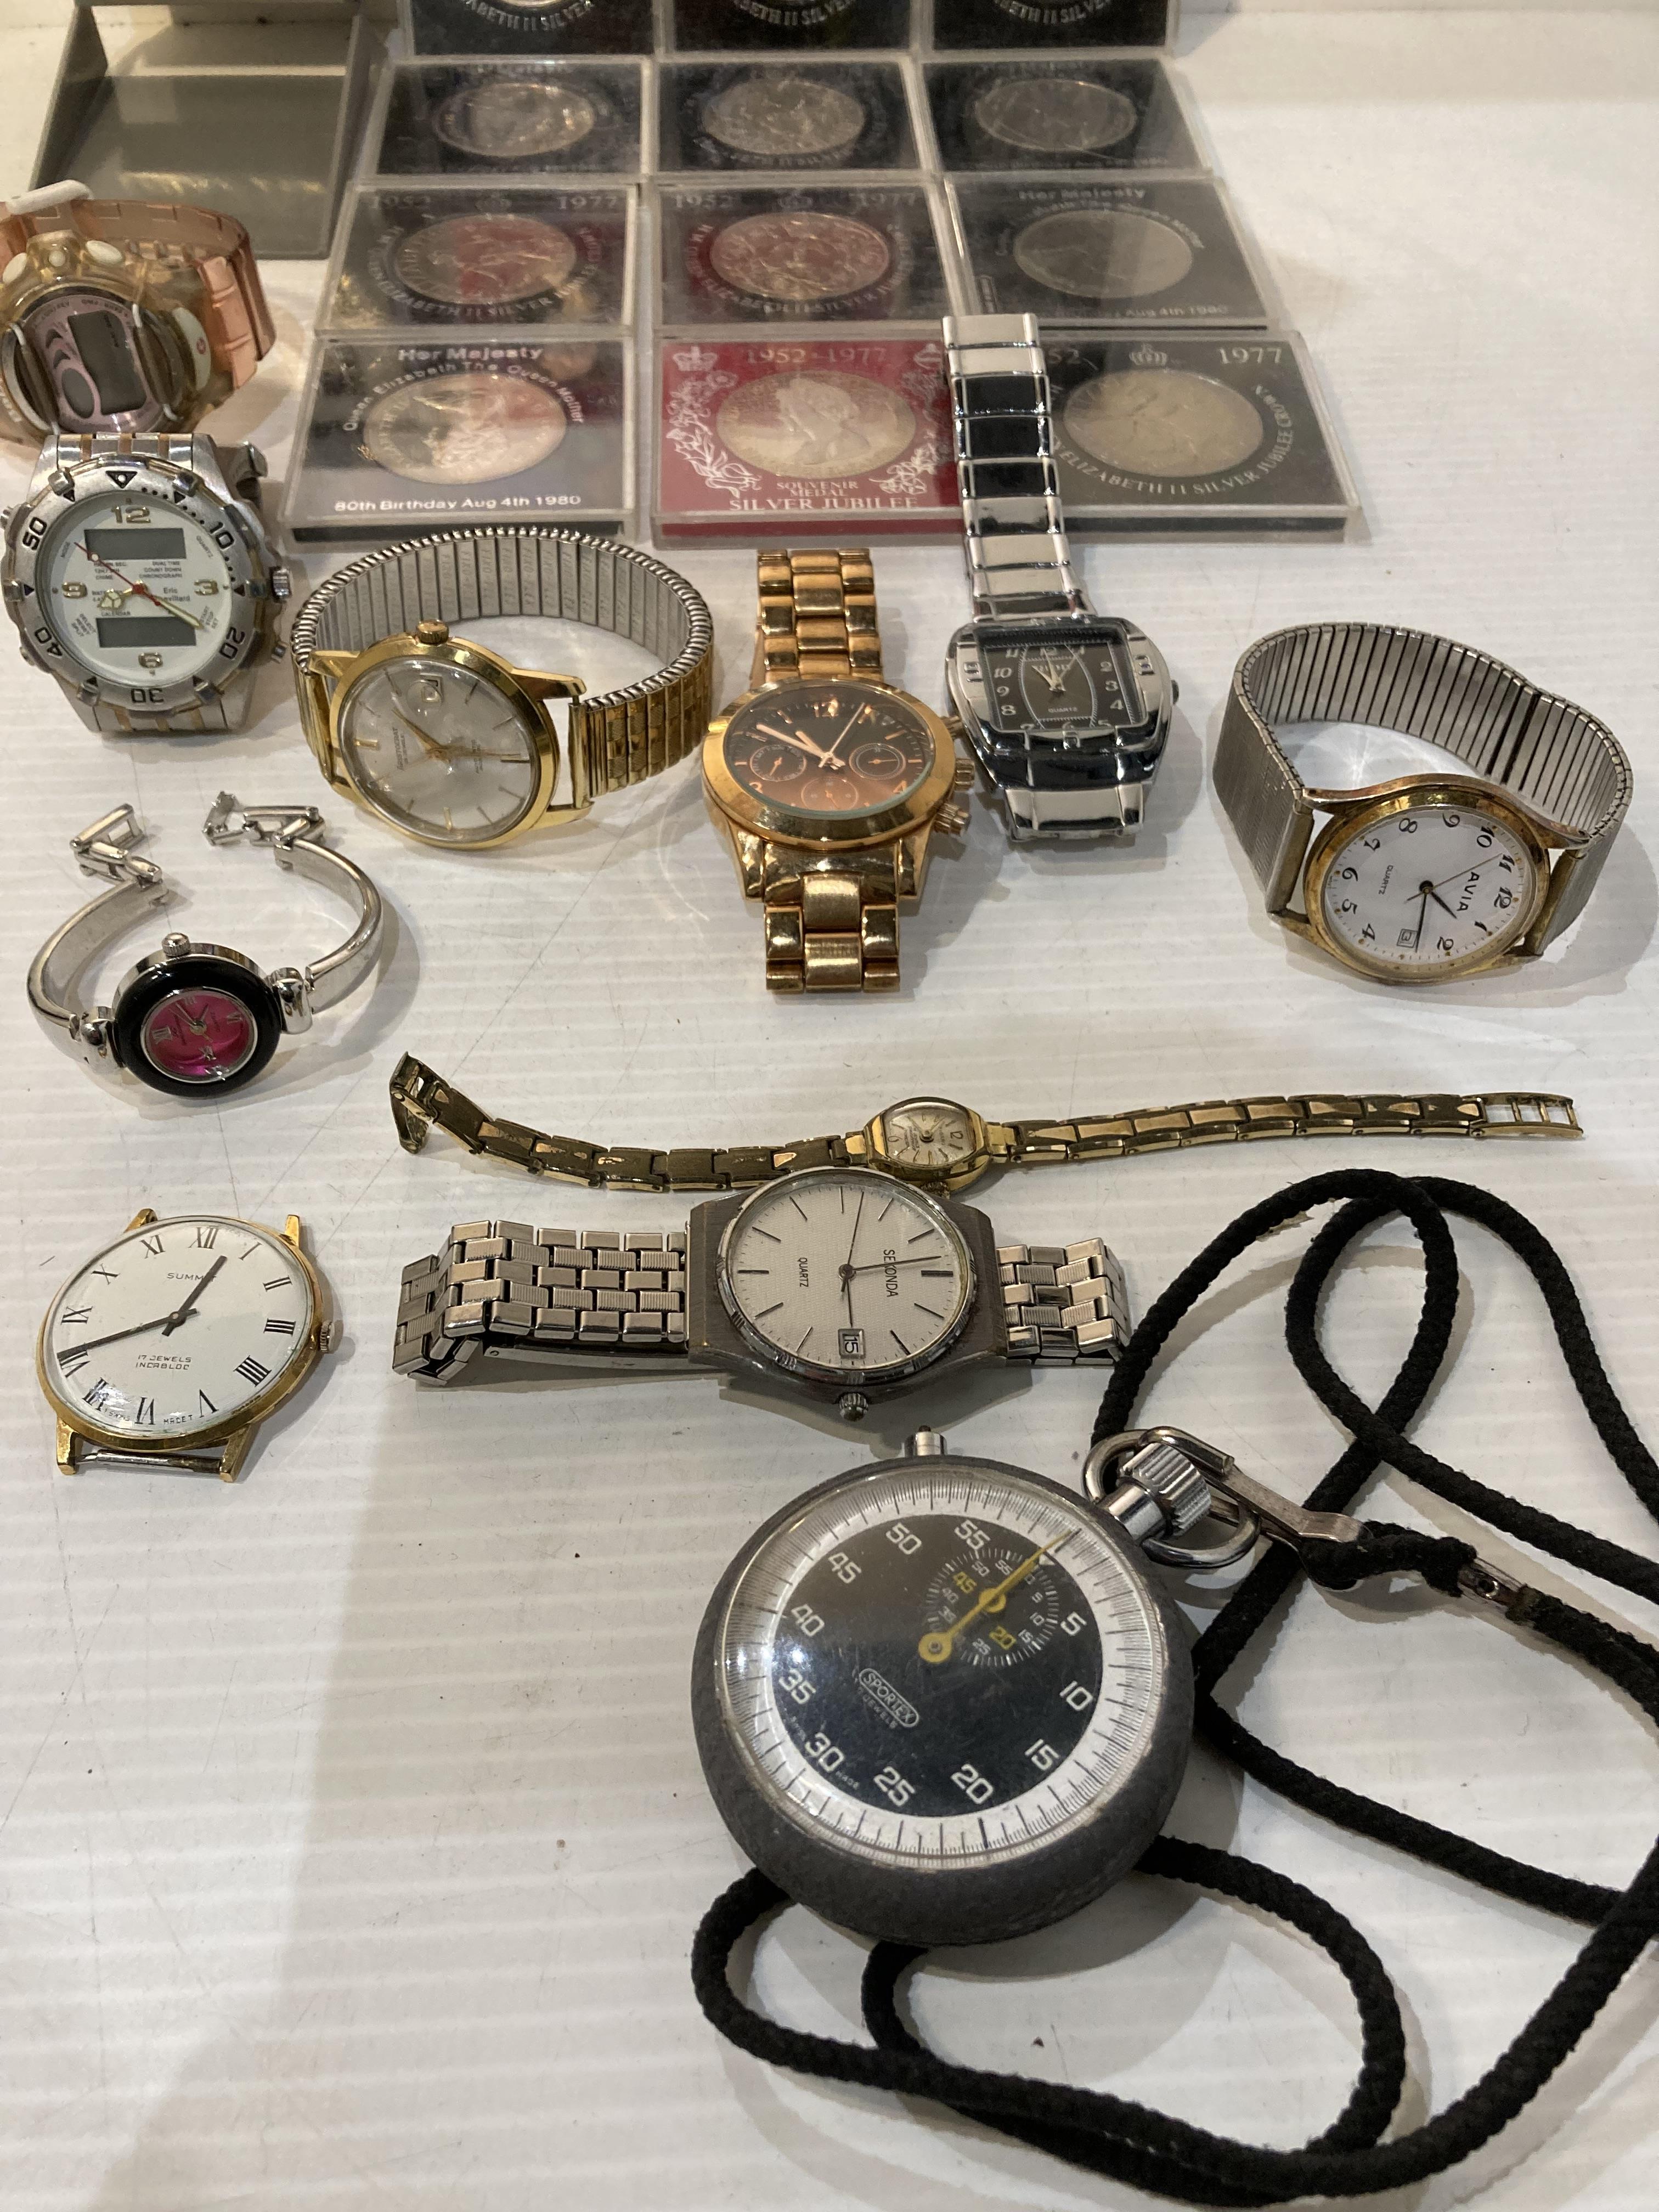 Eleven assorted watches including, Baby-G, - Image 4 of 4